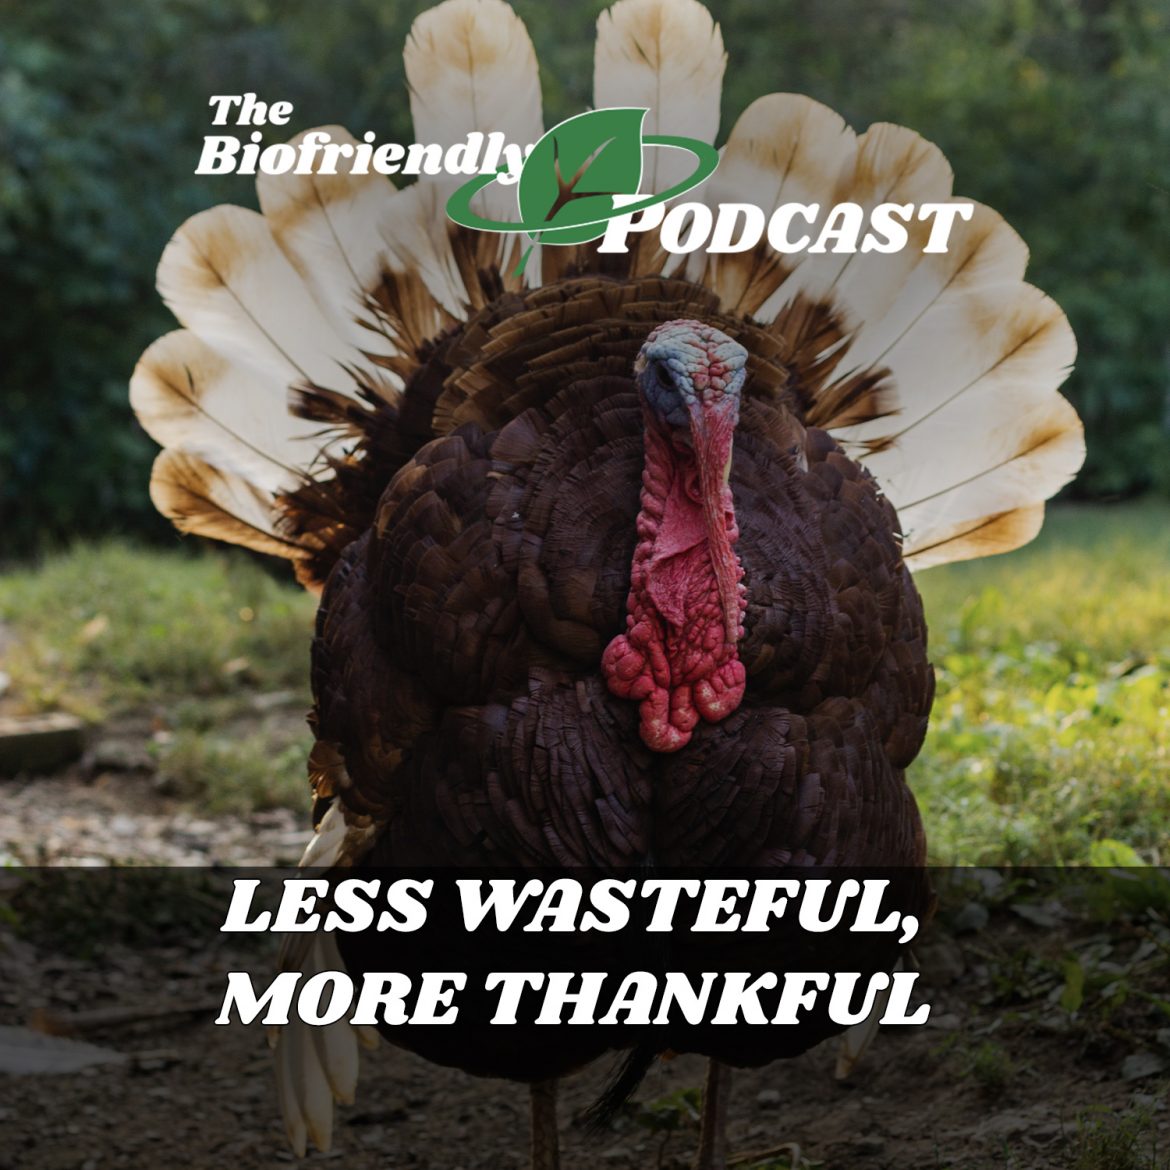 Less Wasteful, More Thankful